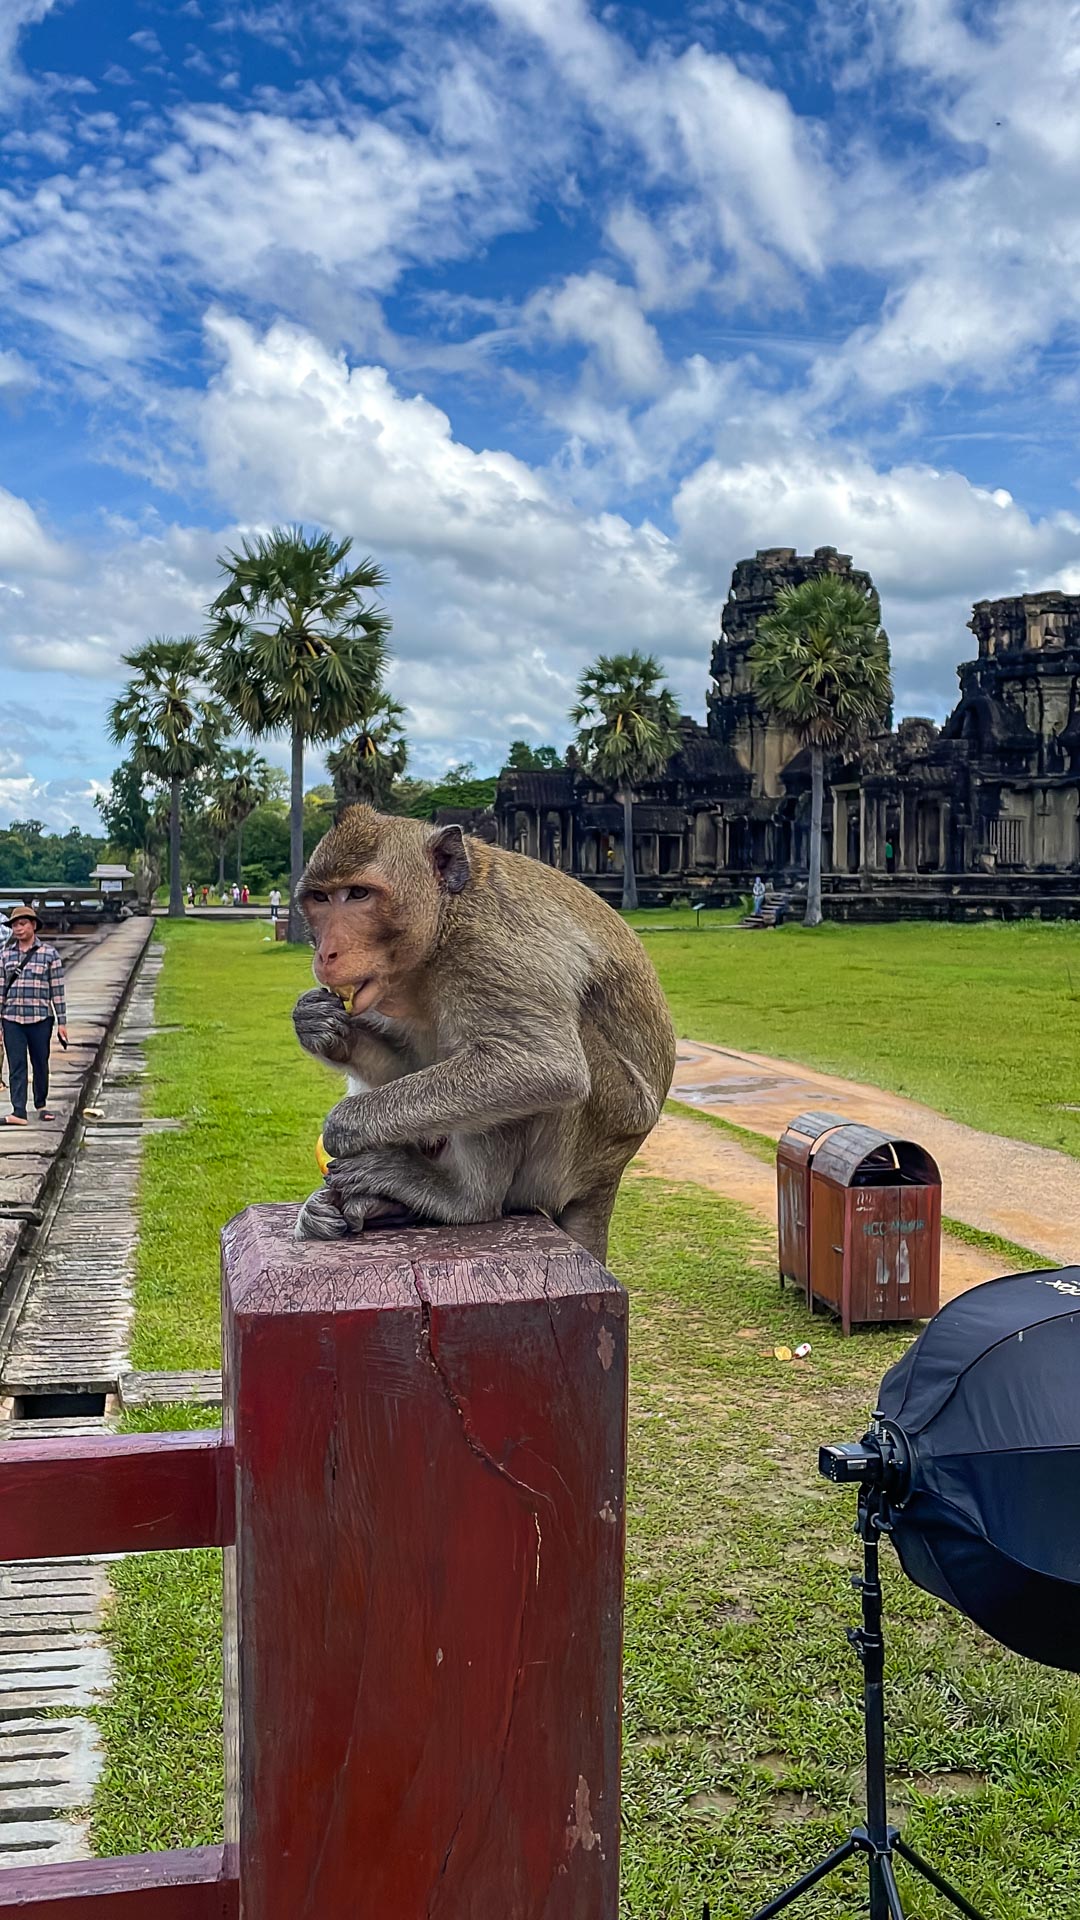 /fm/Files//Pictures/Ido Uploads/Asia/cambodia/All/Angkor Wat - Monkey.jpg